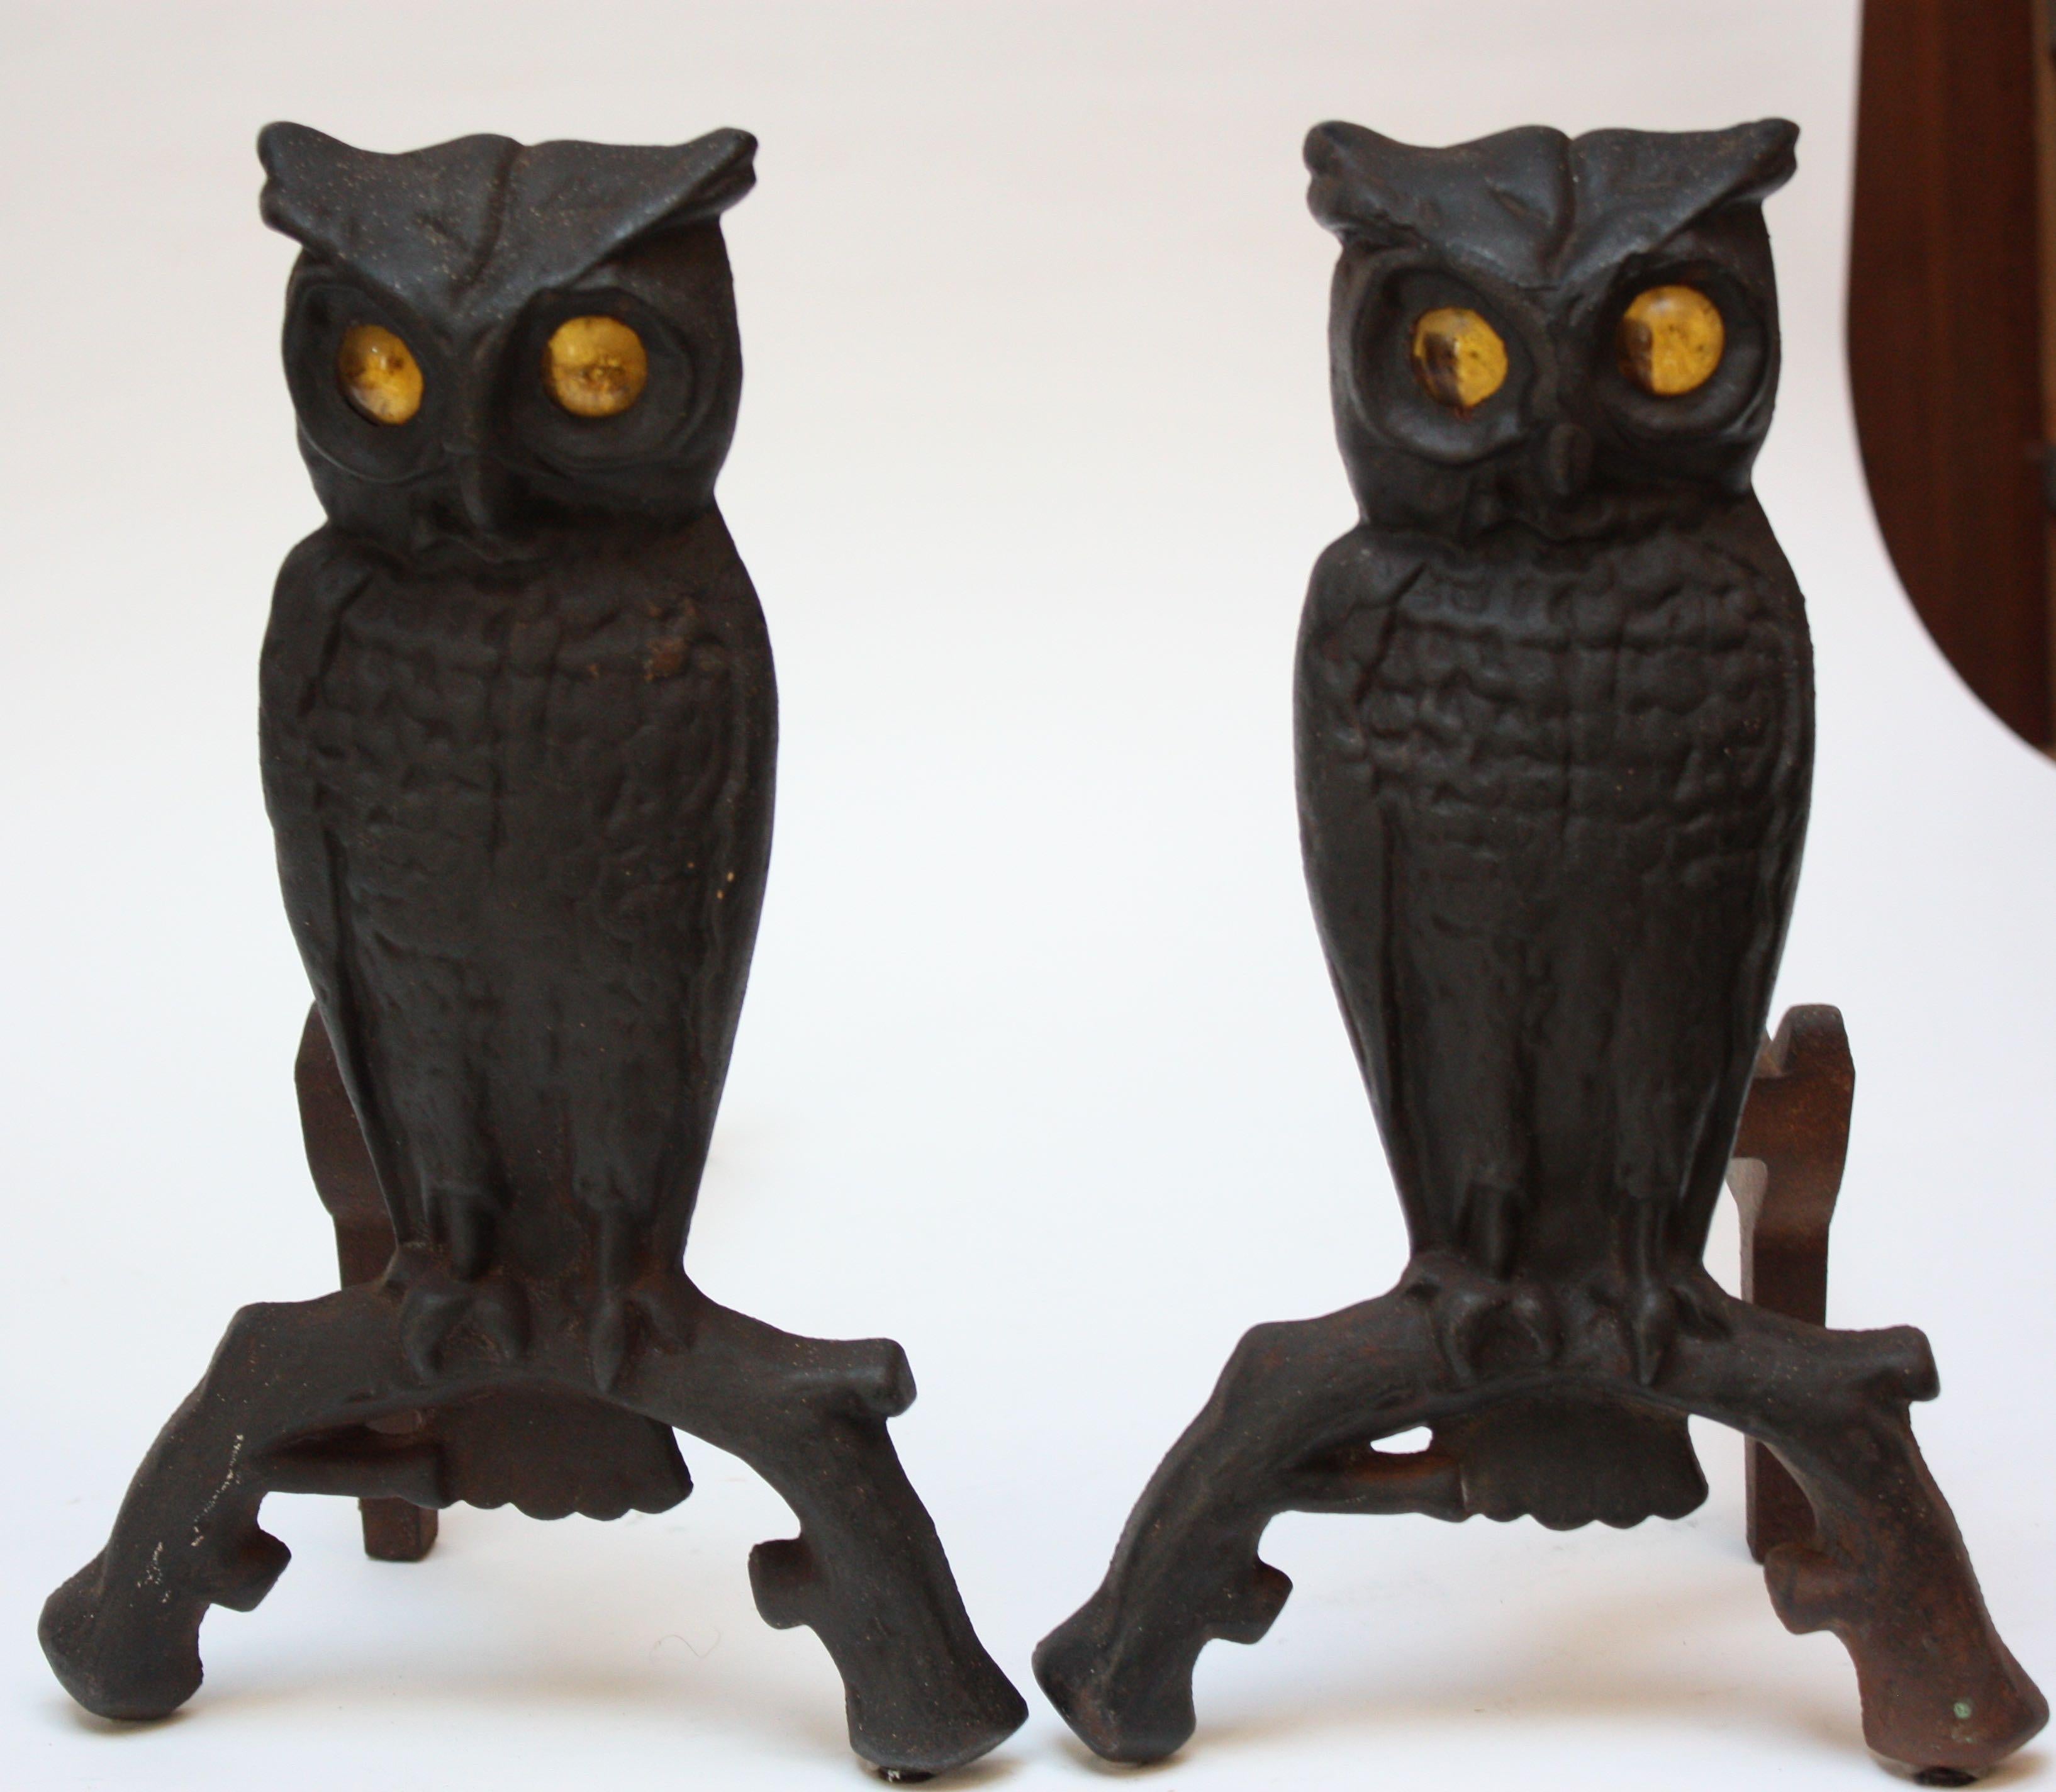 This pair of early 20th century andirons is composed of cast iron owls on arched branch uprights fitted to billet bars. The glass amber eyes, which glow when placed in front of a fire, are nicely contrasted by the black cast iron. All the hardware